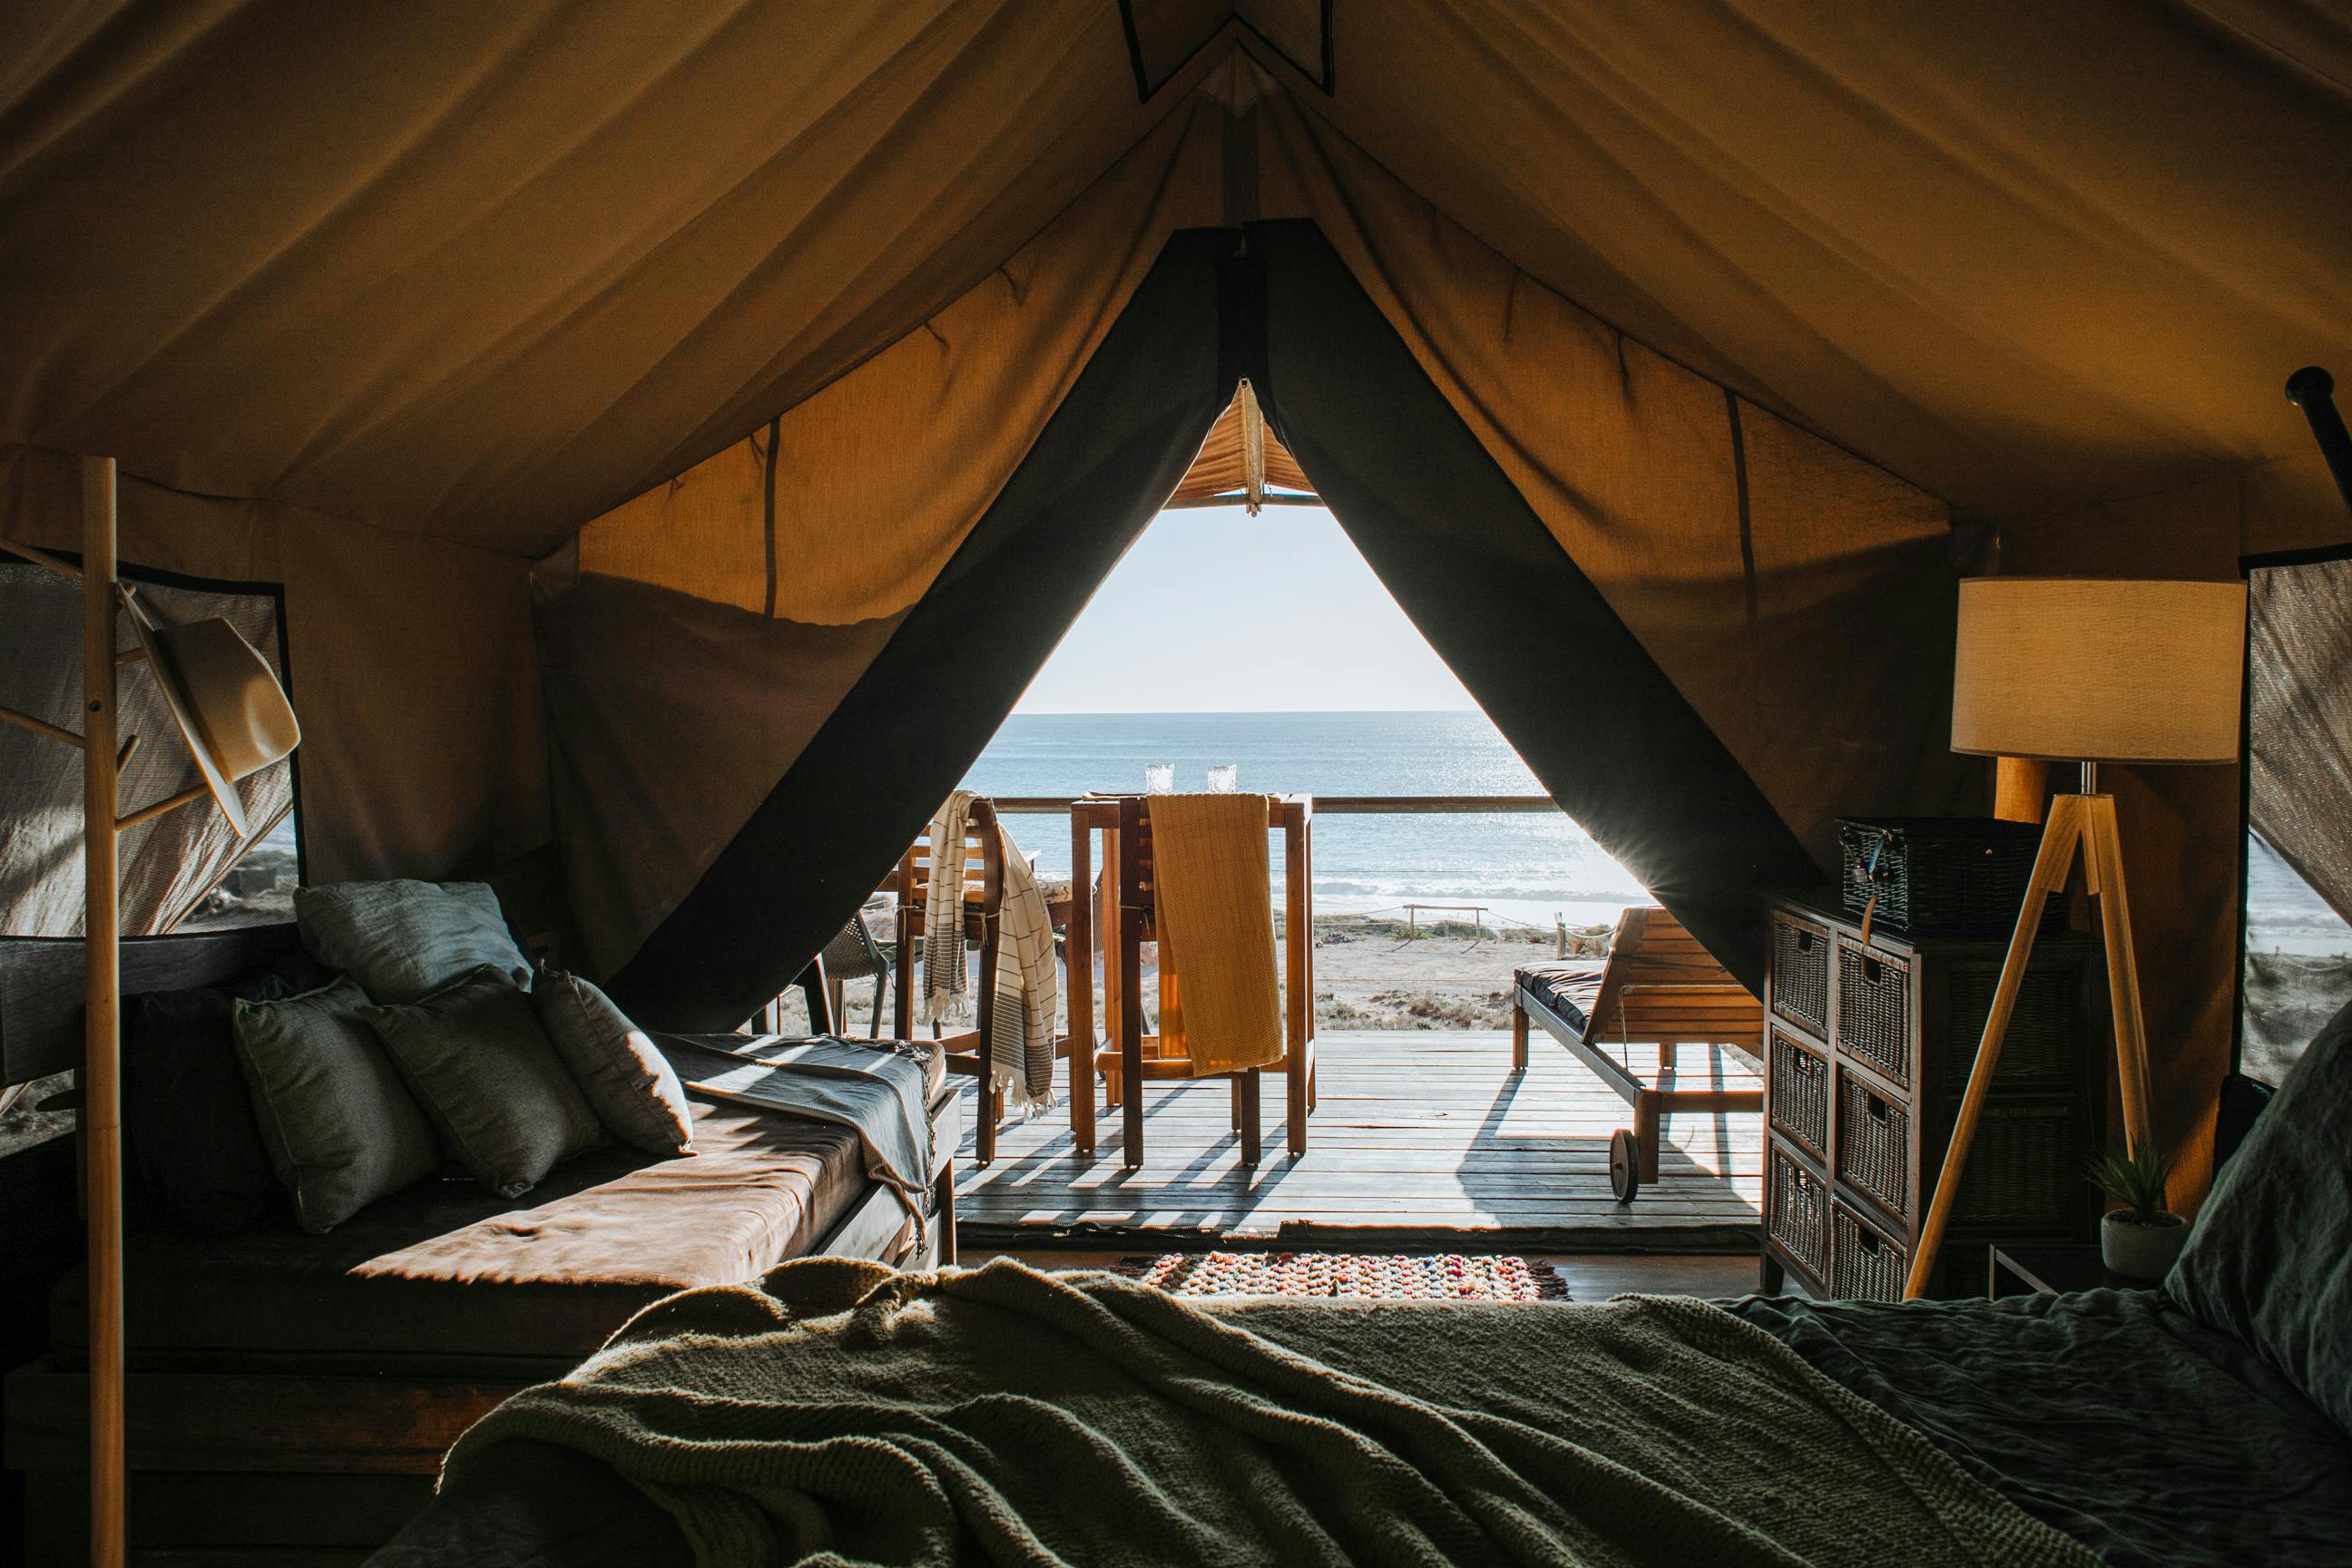 A tented hotel room near the ocean | Source: Pexels